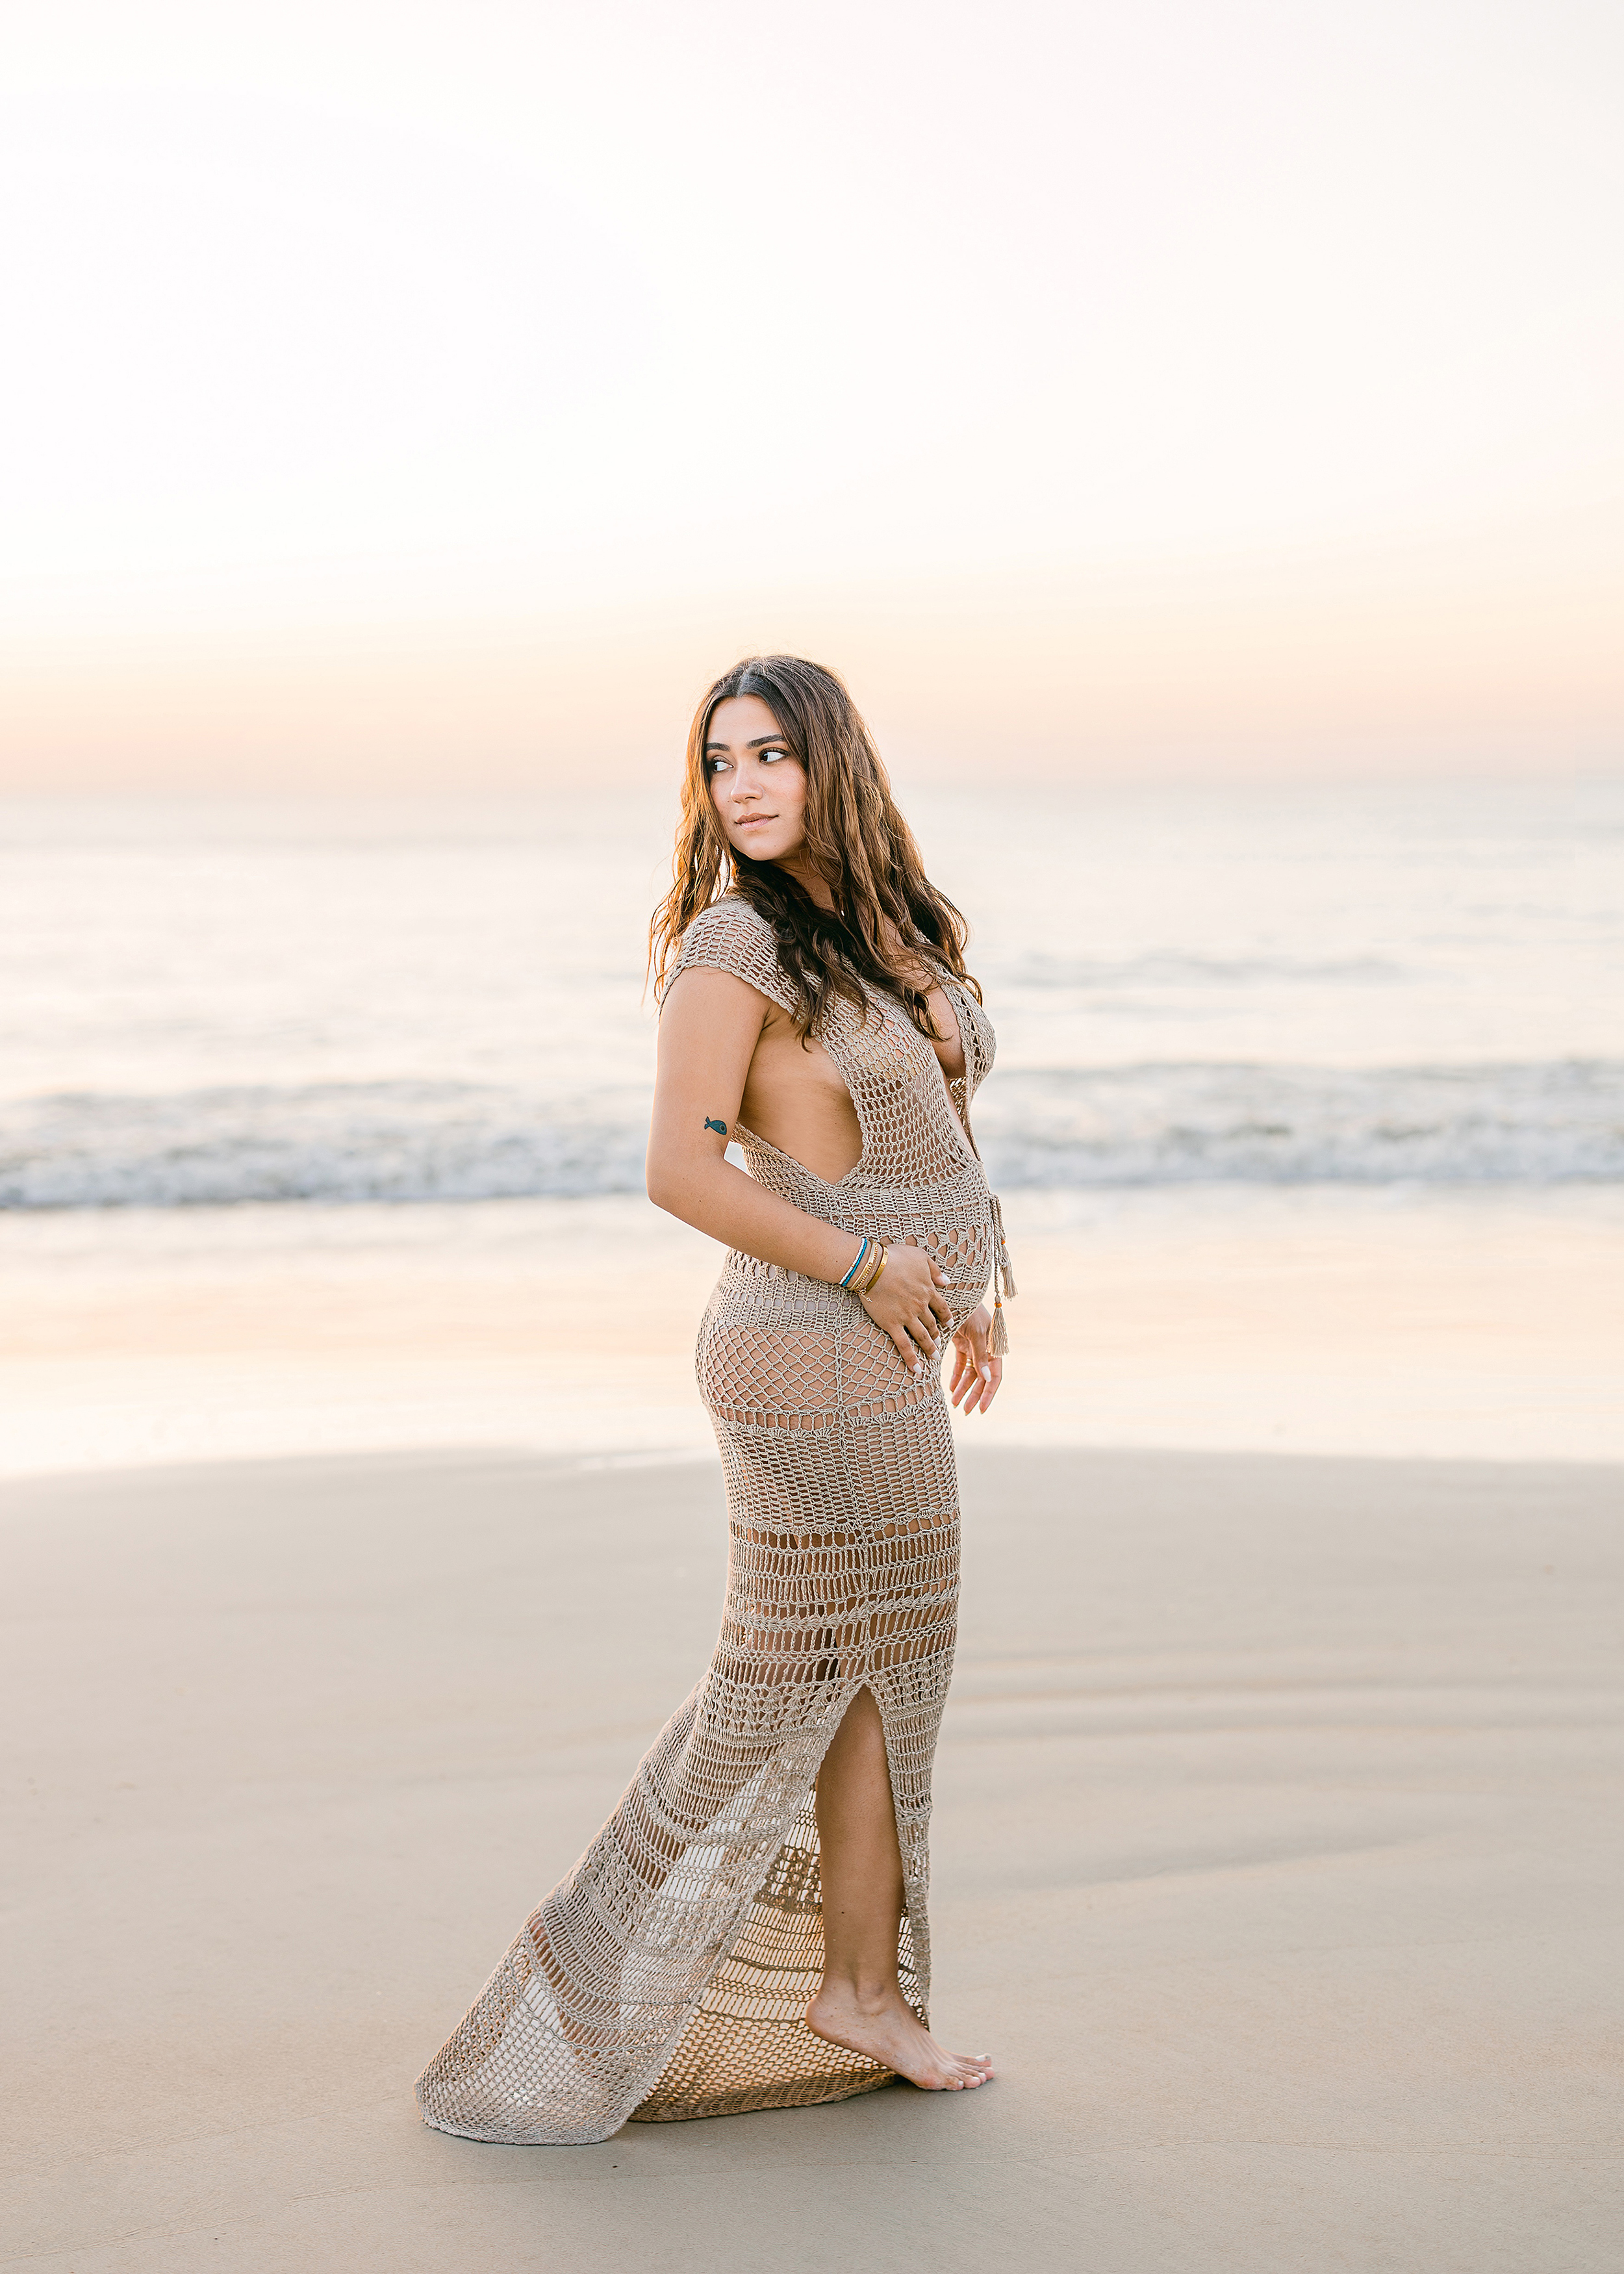 dark long haired woman walking on the sand in shimmery dress on the beach at sunrise